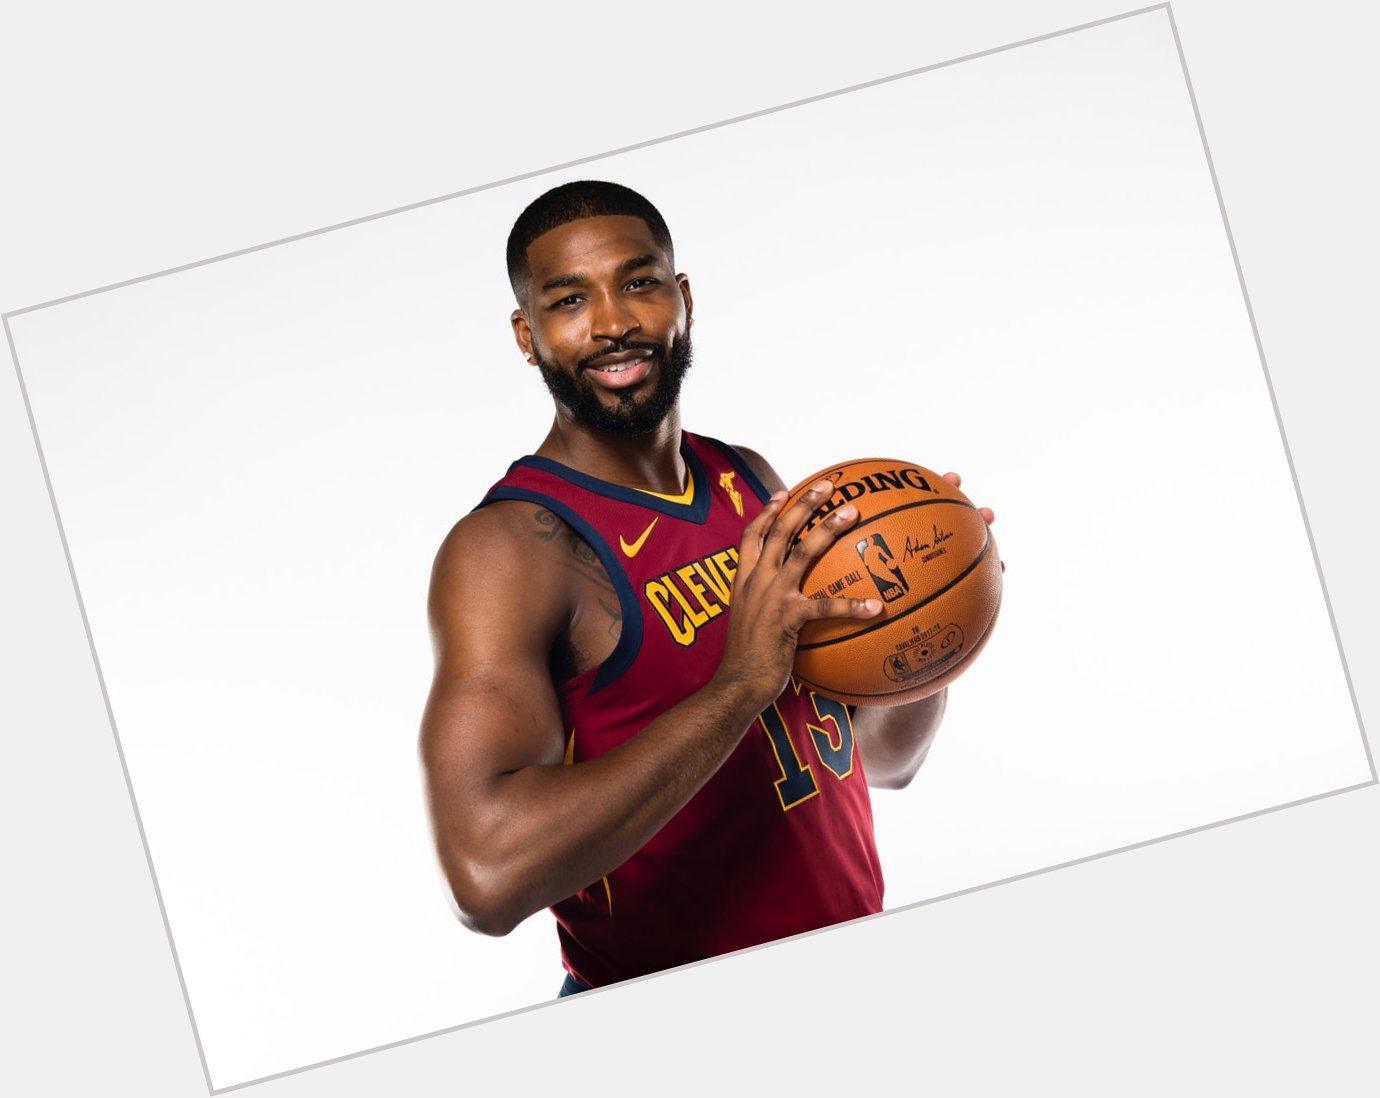 Join us in wishing Tristan Thompson of the a HAPPY 27th BIRTHDAY!    